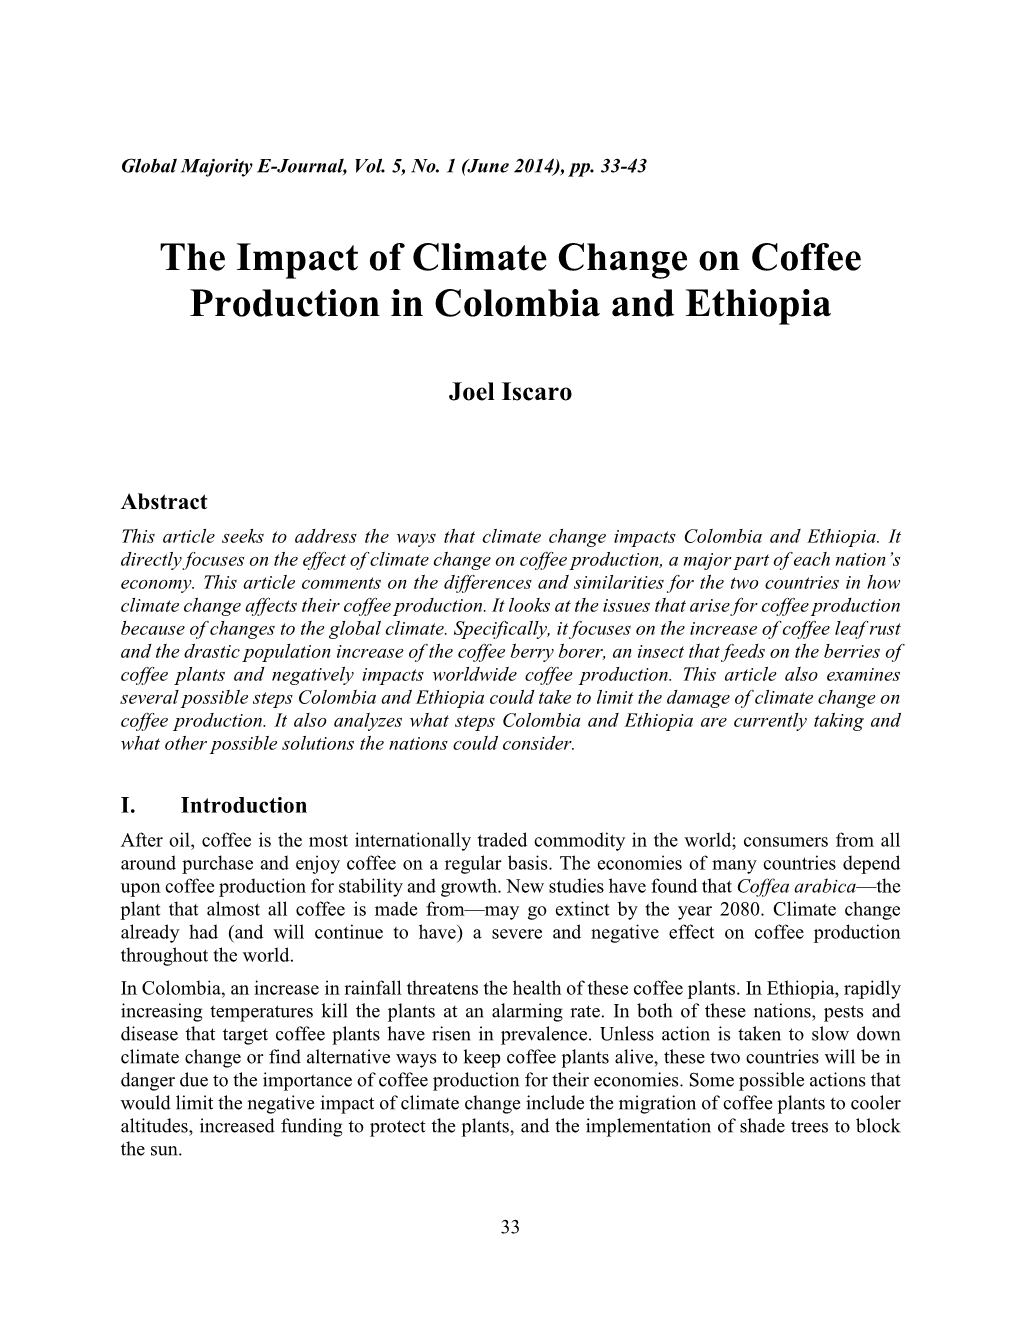 The Impact of Climate Change on Coffee Production in Colombia and Ethiopia